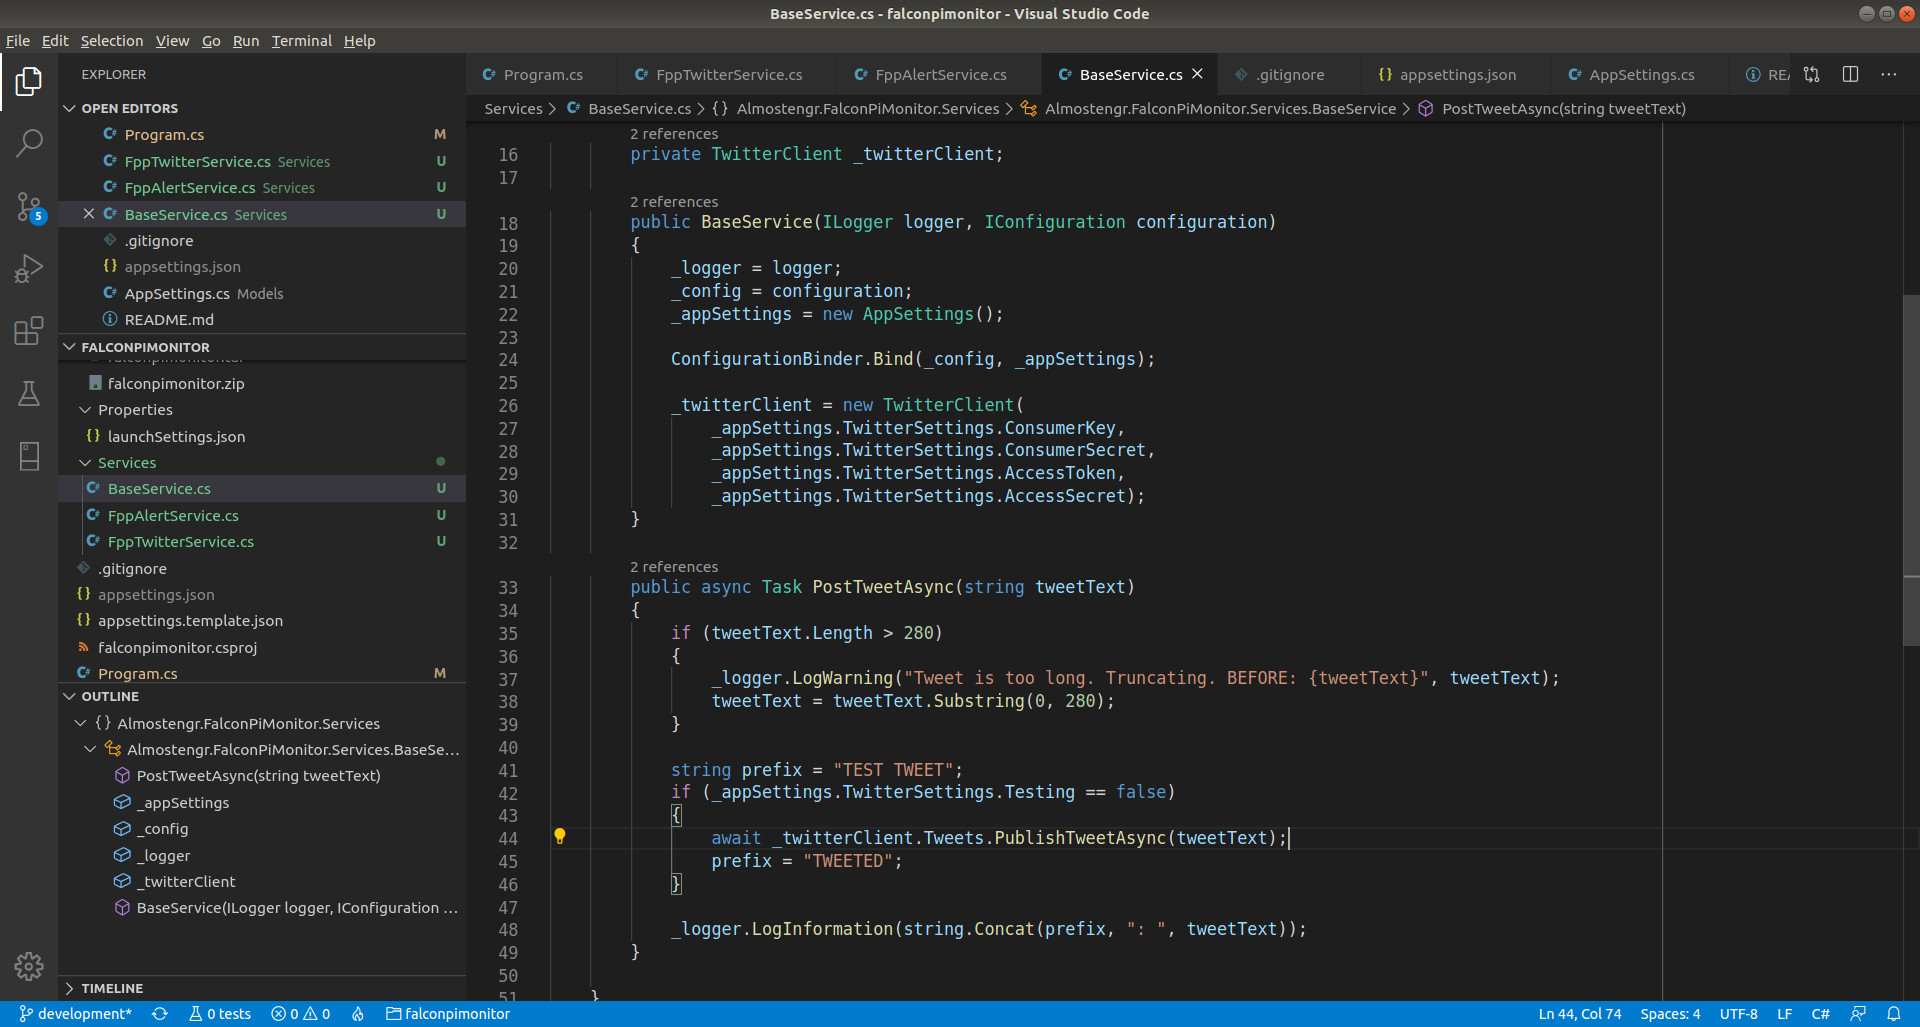 Screenshot of C# application with code